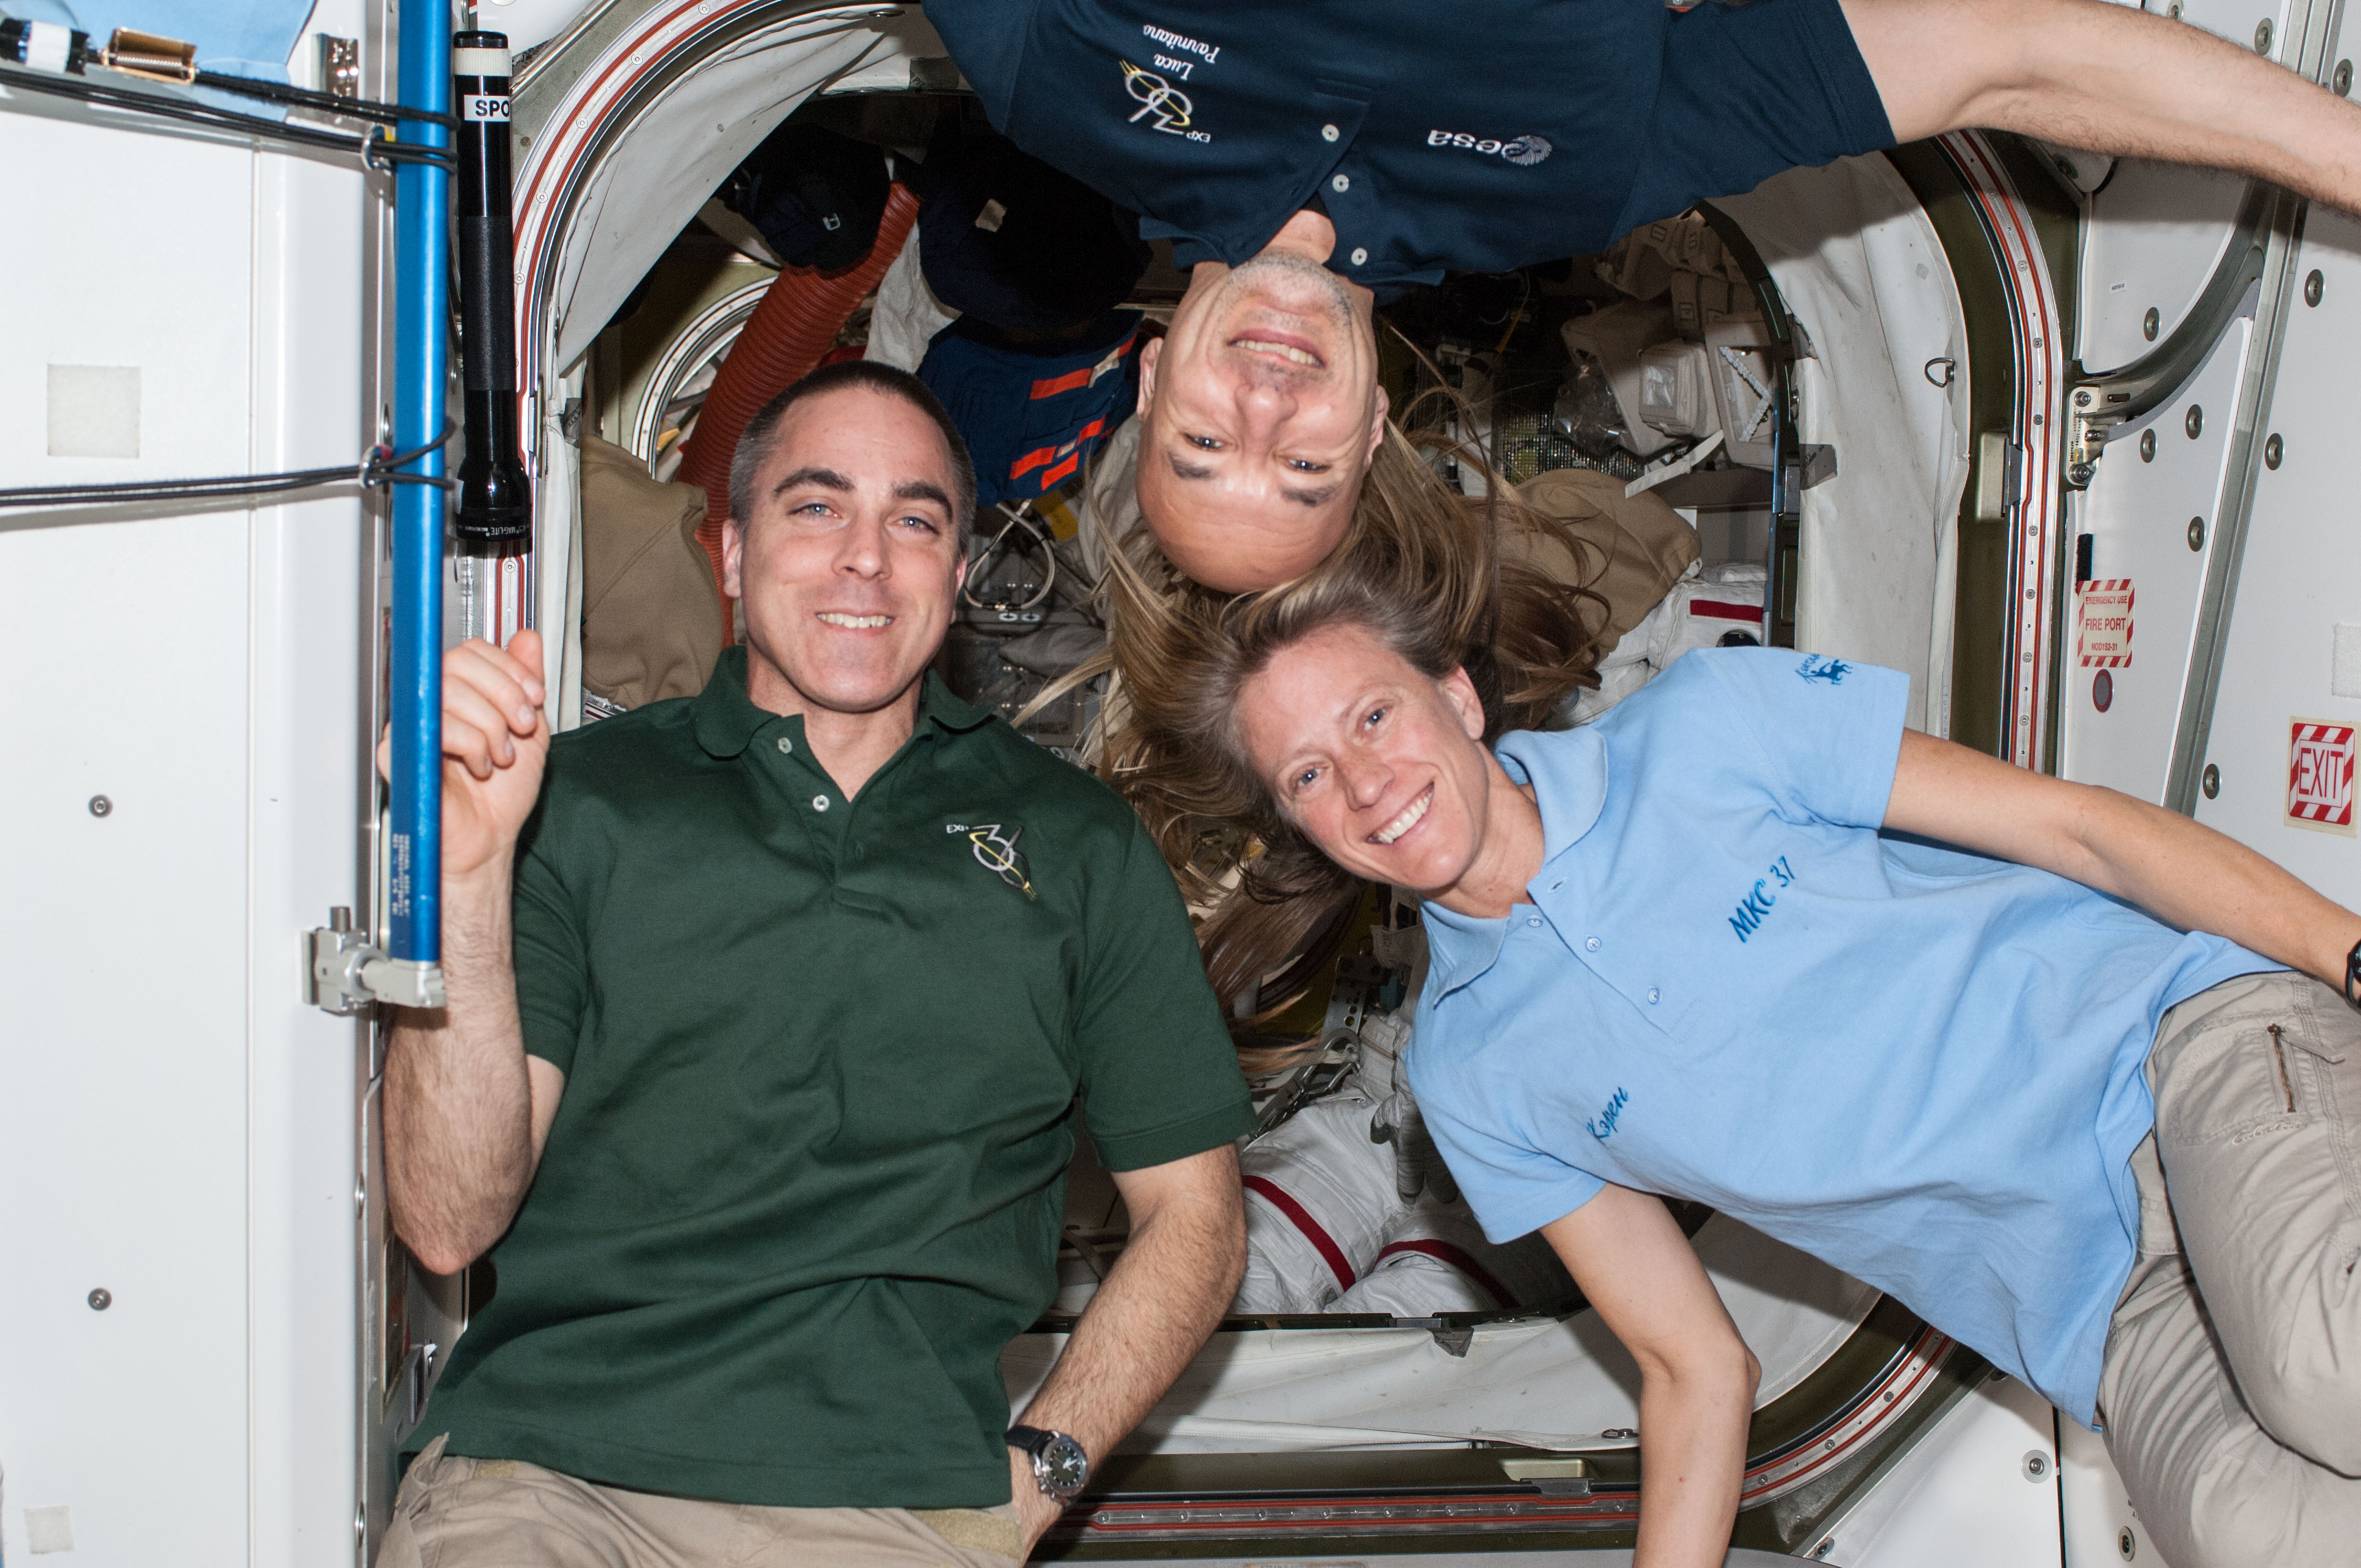 Chris Cassidy, Luca Parmitano and Karen Nyberg oversaw operations on the U.S. segment of the ISS from May-September 2013. Photo Credit: NASA